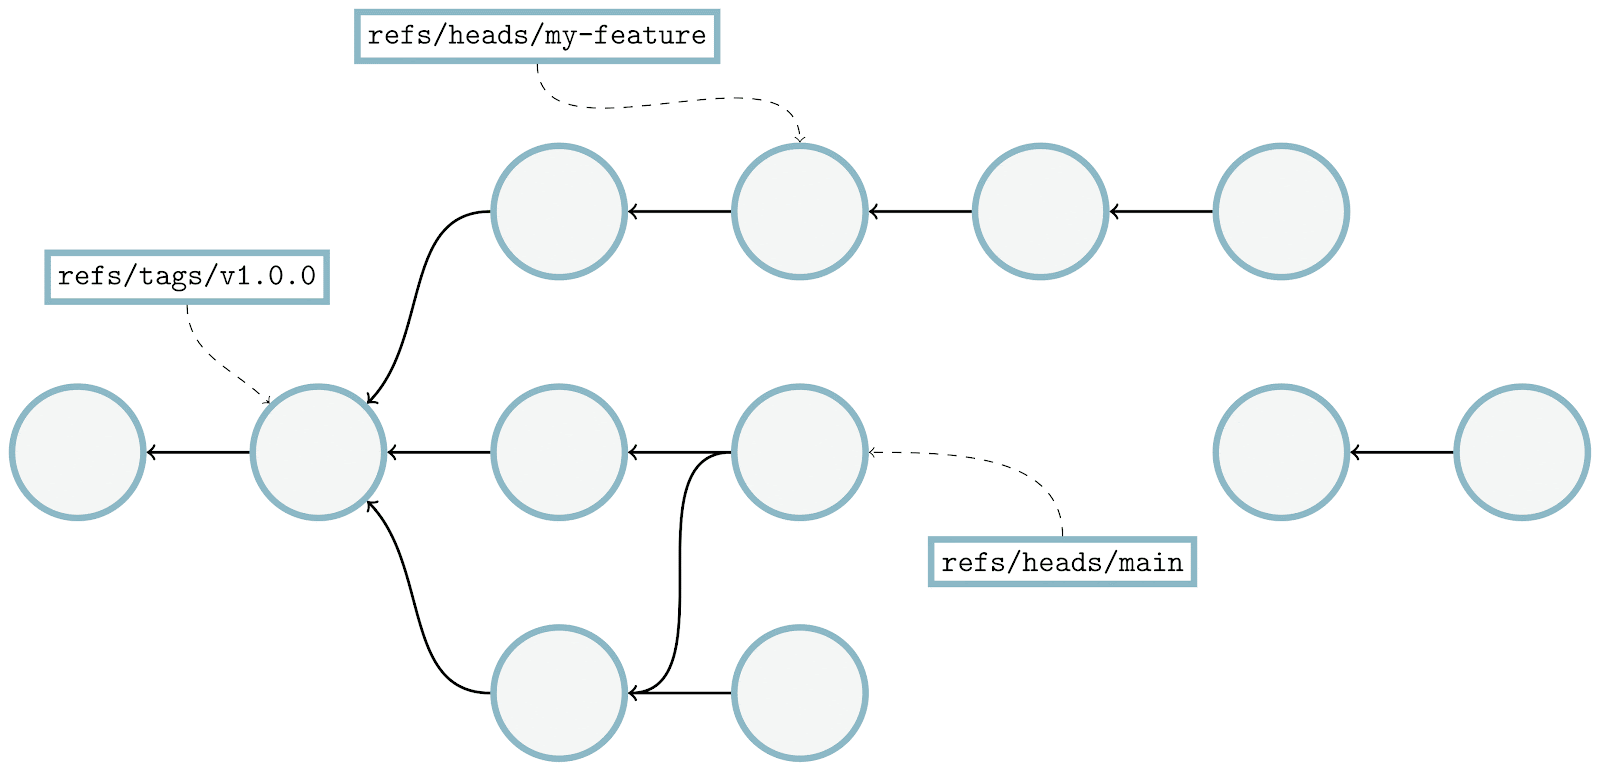 Demonstration of how Git walks through a commit graph, from commit to parent